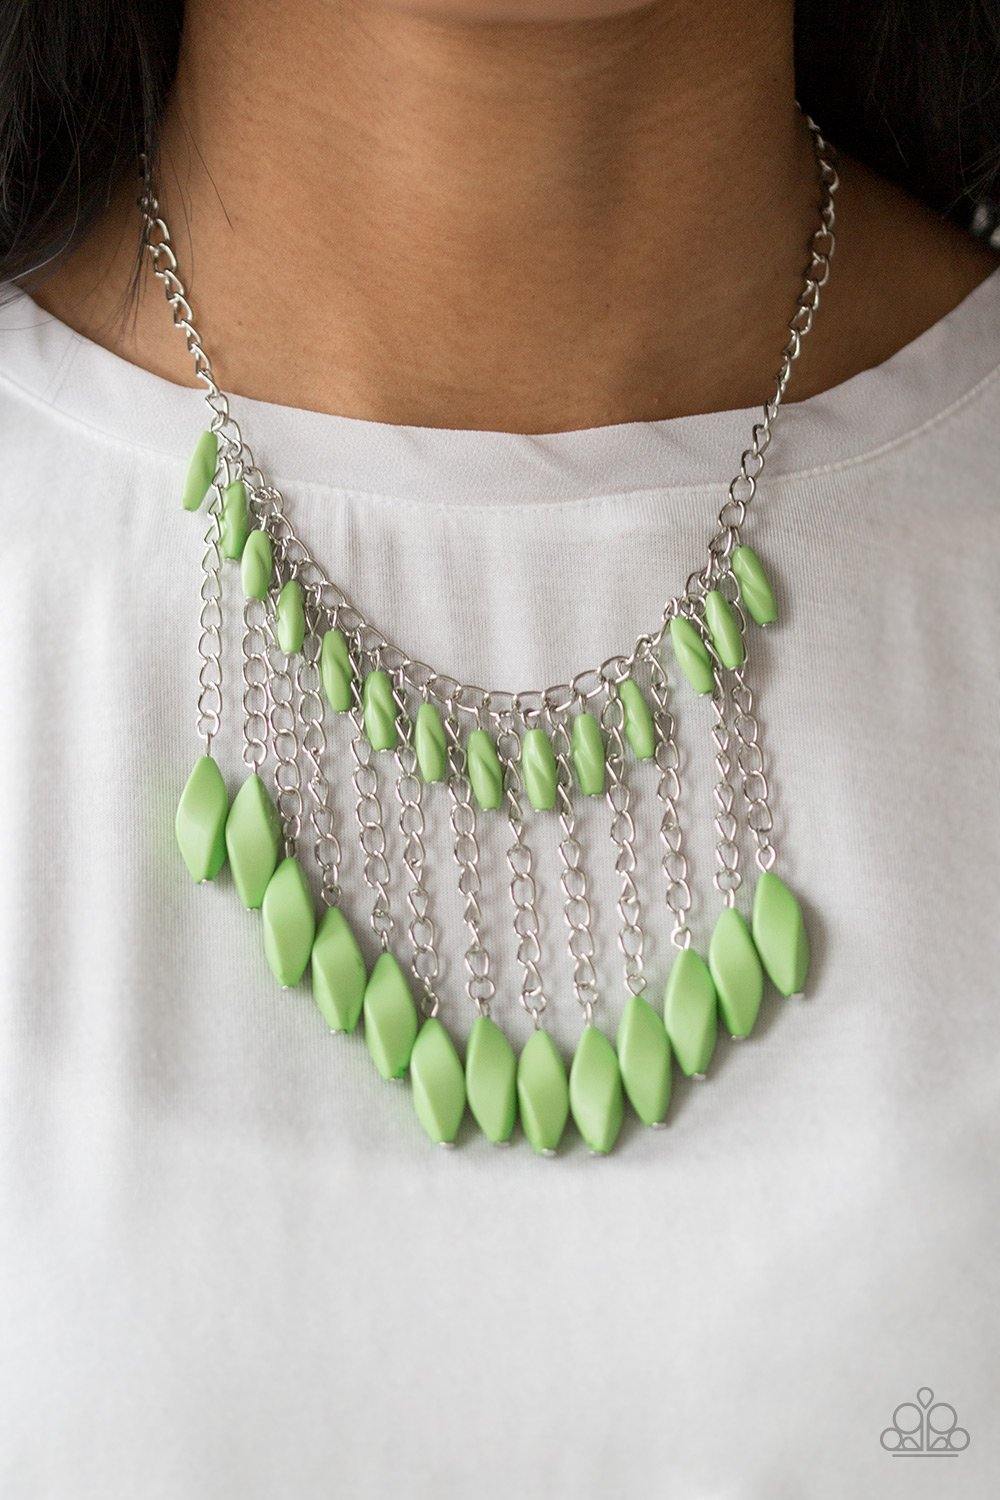 Venturous Vibes - Green Necklace - Paparazzi Accessories - Sassysblingandthings